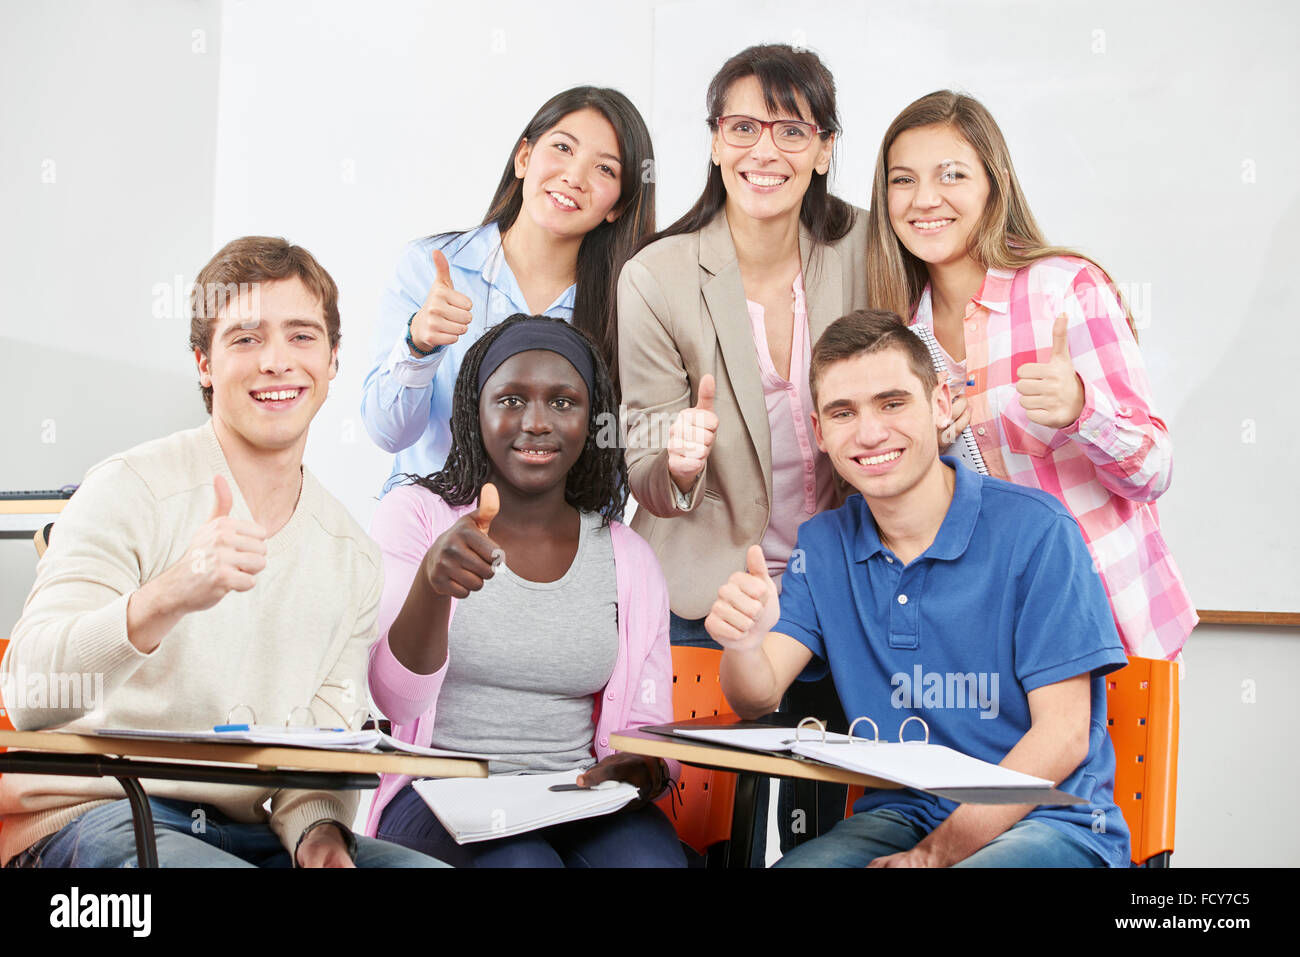 Successful group of students with their thumbs up Stock Photo